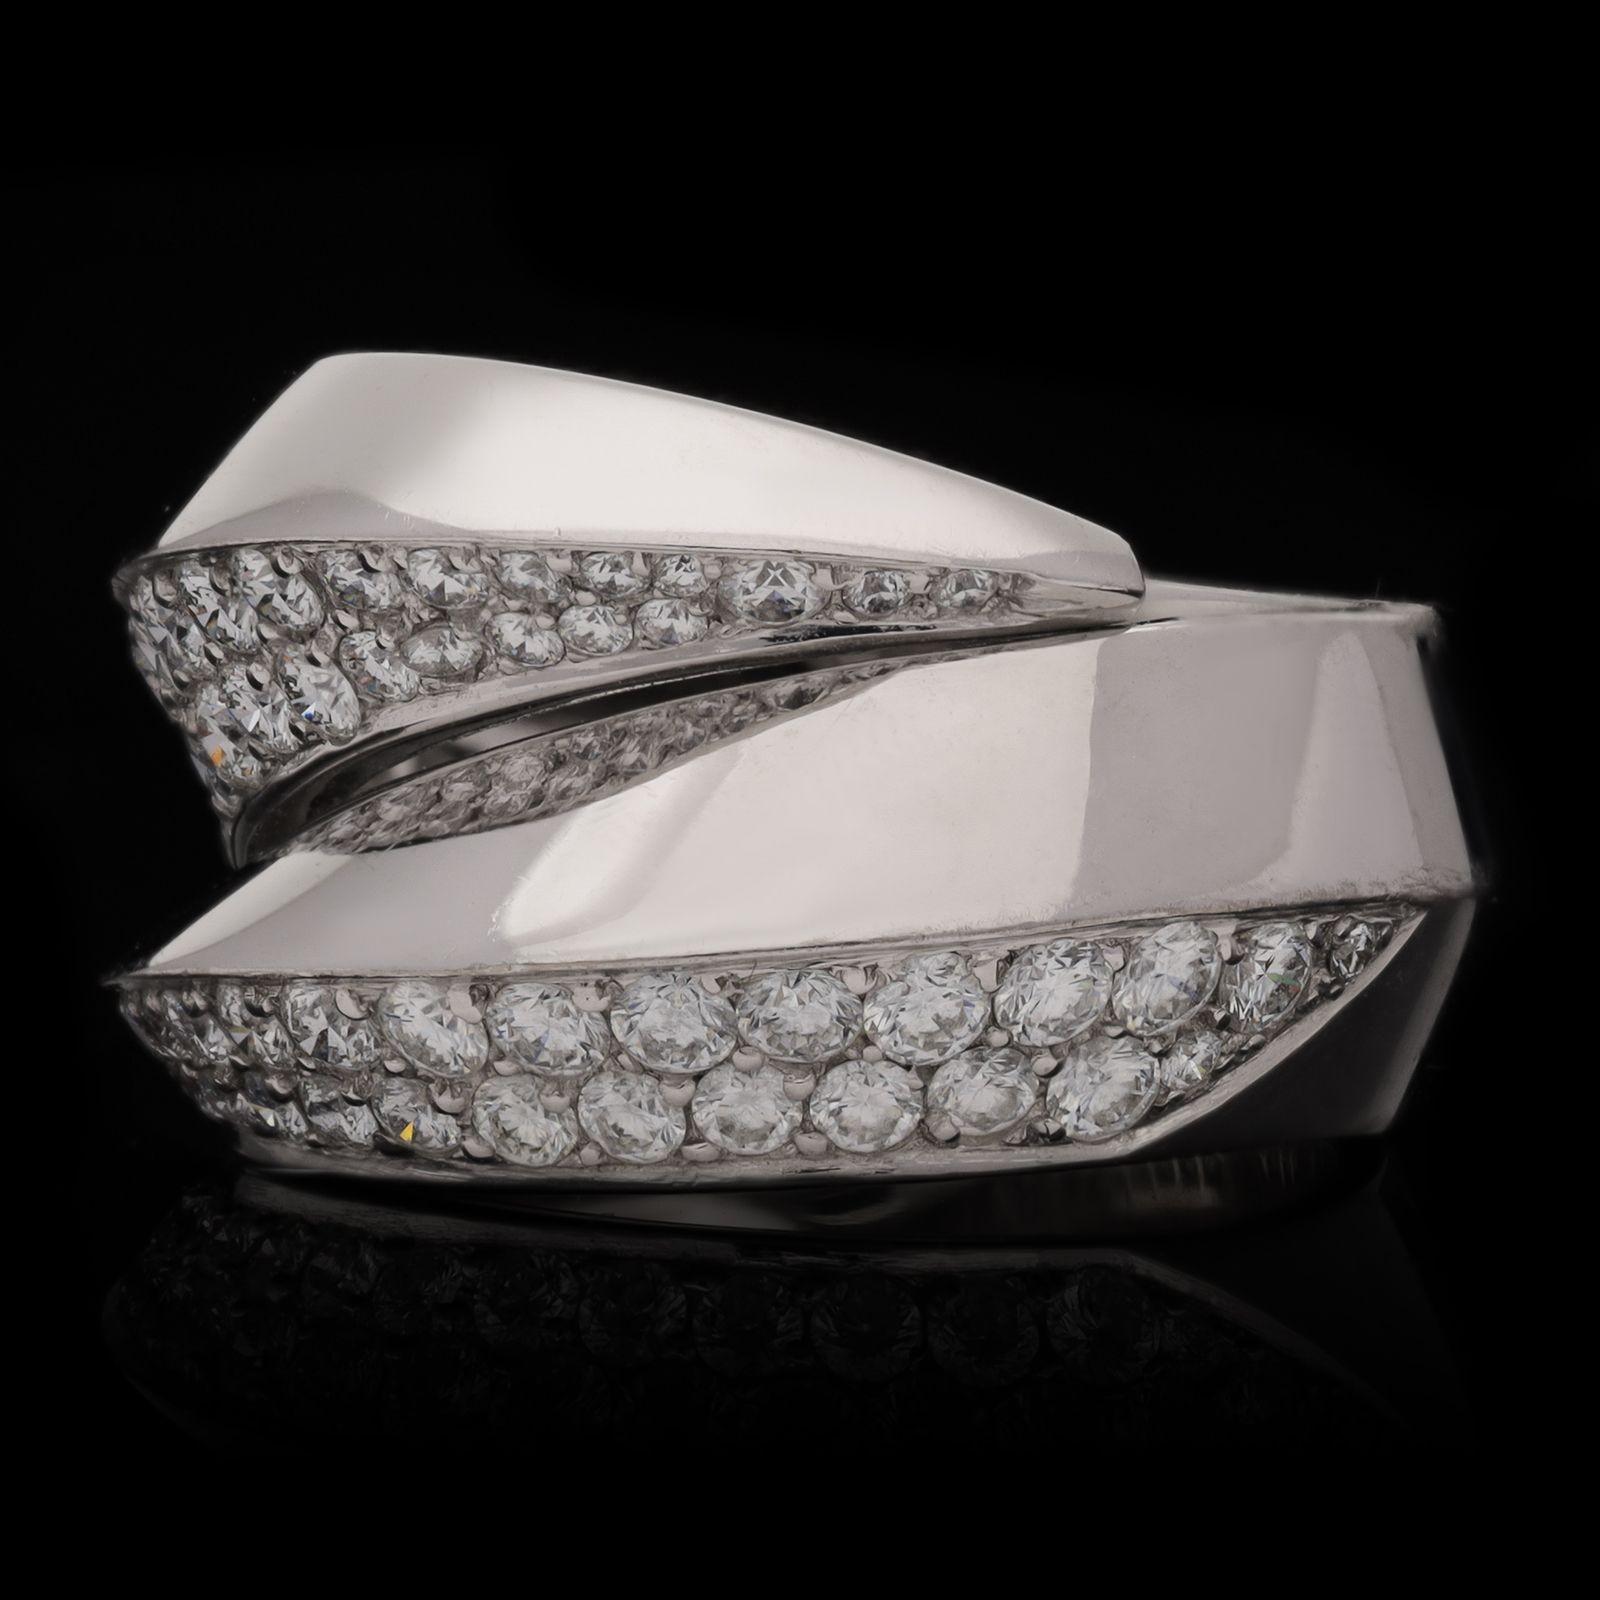 A striking 18ct white gold and diamond ‘Panthère Griffe’ ring by Cartier, c.2000s, designed as a pair of claws encircling the finger and overlapping at the front, the sharply pointed talons with a raised triangular profile, each pavé set to one